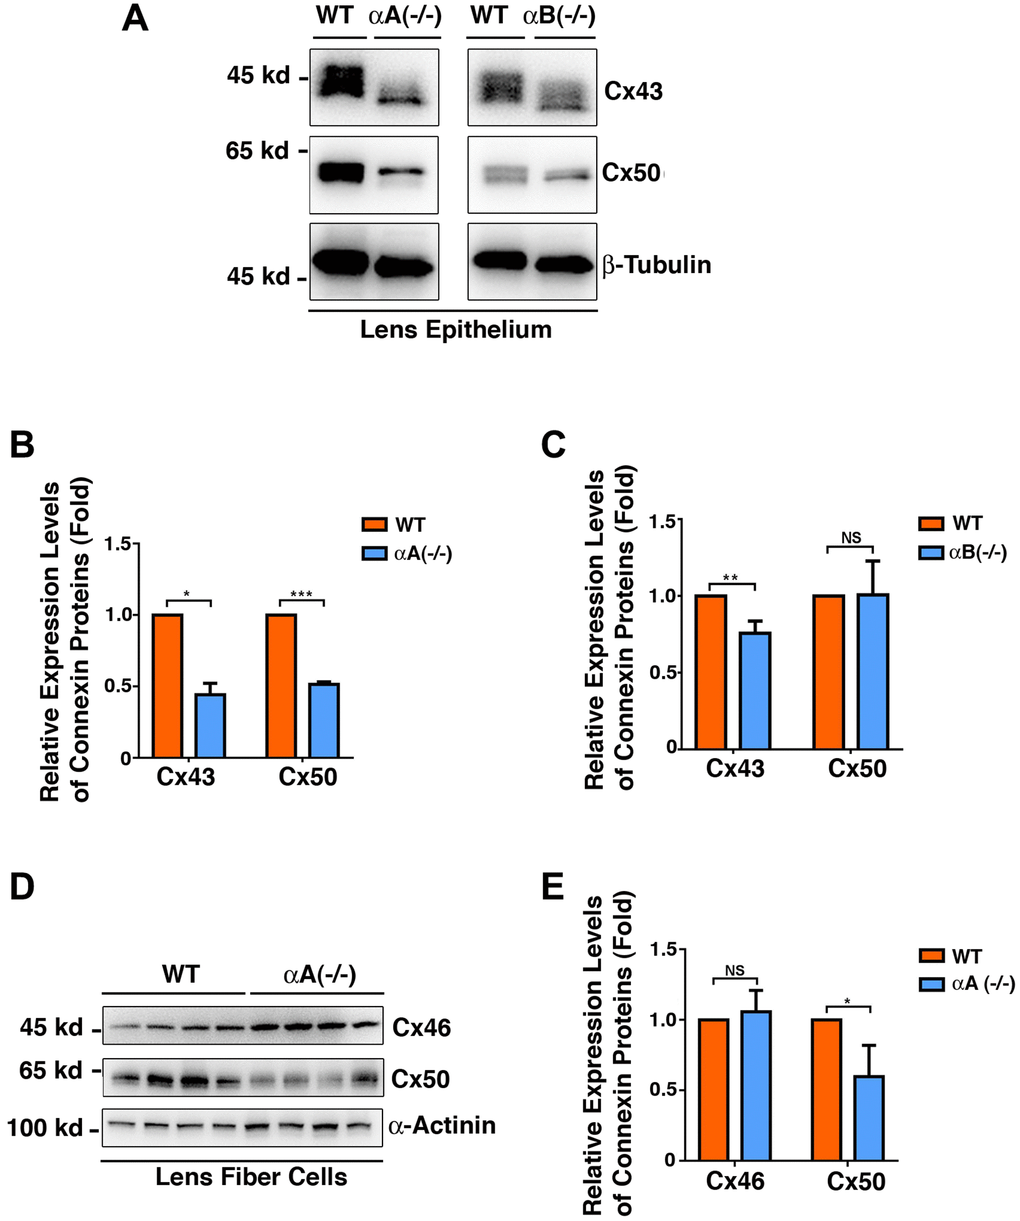 Differential expression patterns of the connexins Cx43, Cx46 and Cx50 in the epithelial cells of the αA-/- and αB-/- mouse lenses (Figure 10A–10C), and in the fiber cells of the αA-/- mouse lenses (Figure 10D–10E). (A) Western blot analysis of Cx43 and Cx50 in the lens epithelial cells of the αA-/- and αB-/- mice. β-Tubulin was showed as a loading control. (B) & (C) Quantification of the western blot results in (A). (D) Western blot analysis of Cx43 and Cx50 in the lens fiber cells of the αA-/- mice. α-Actinin was showed as a loading control. (E) Quantification of the western blot results in (D). NS, not significant, *p **p ***p 